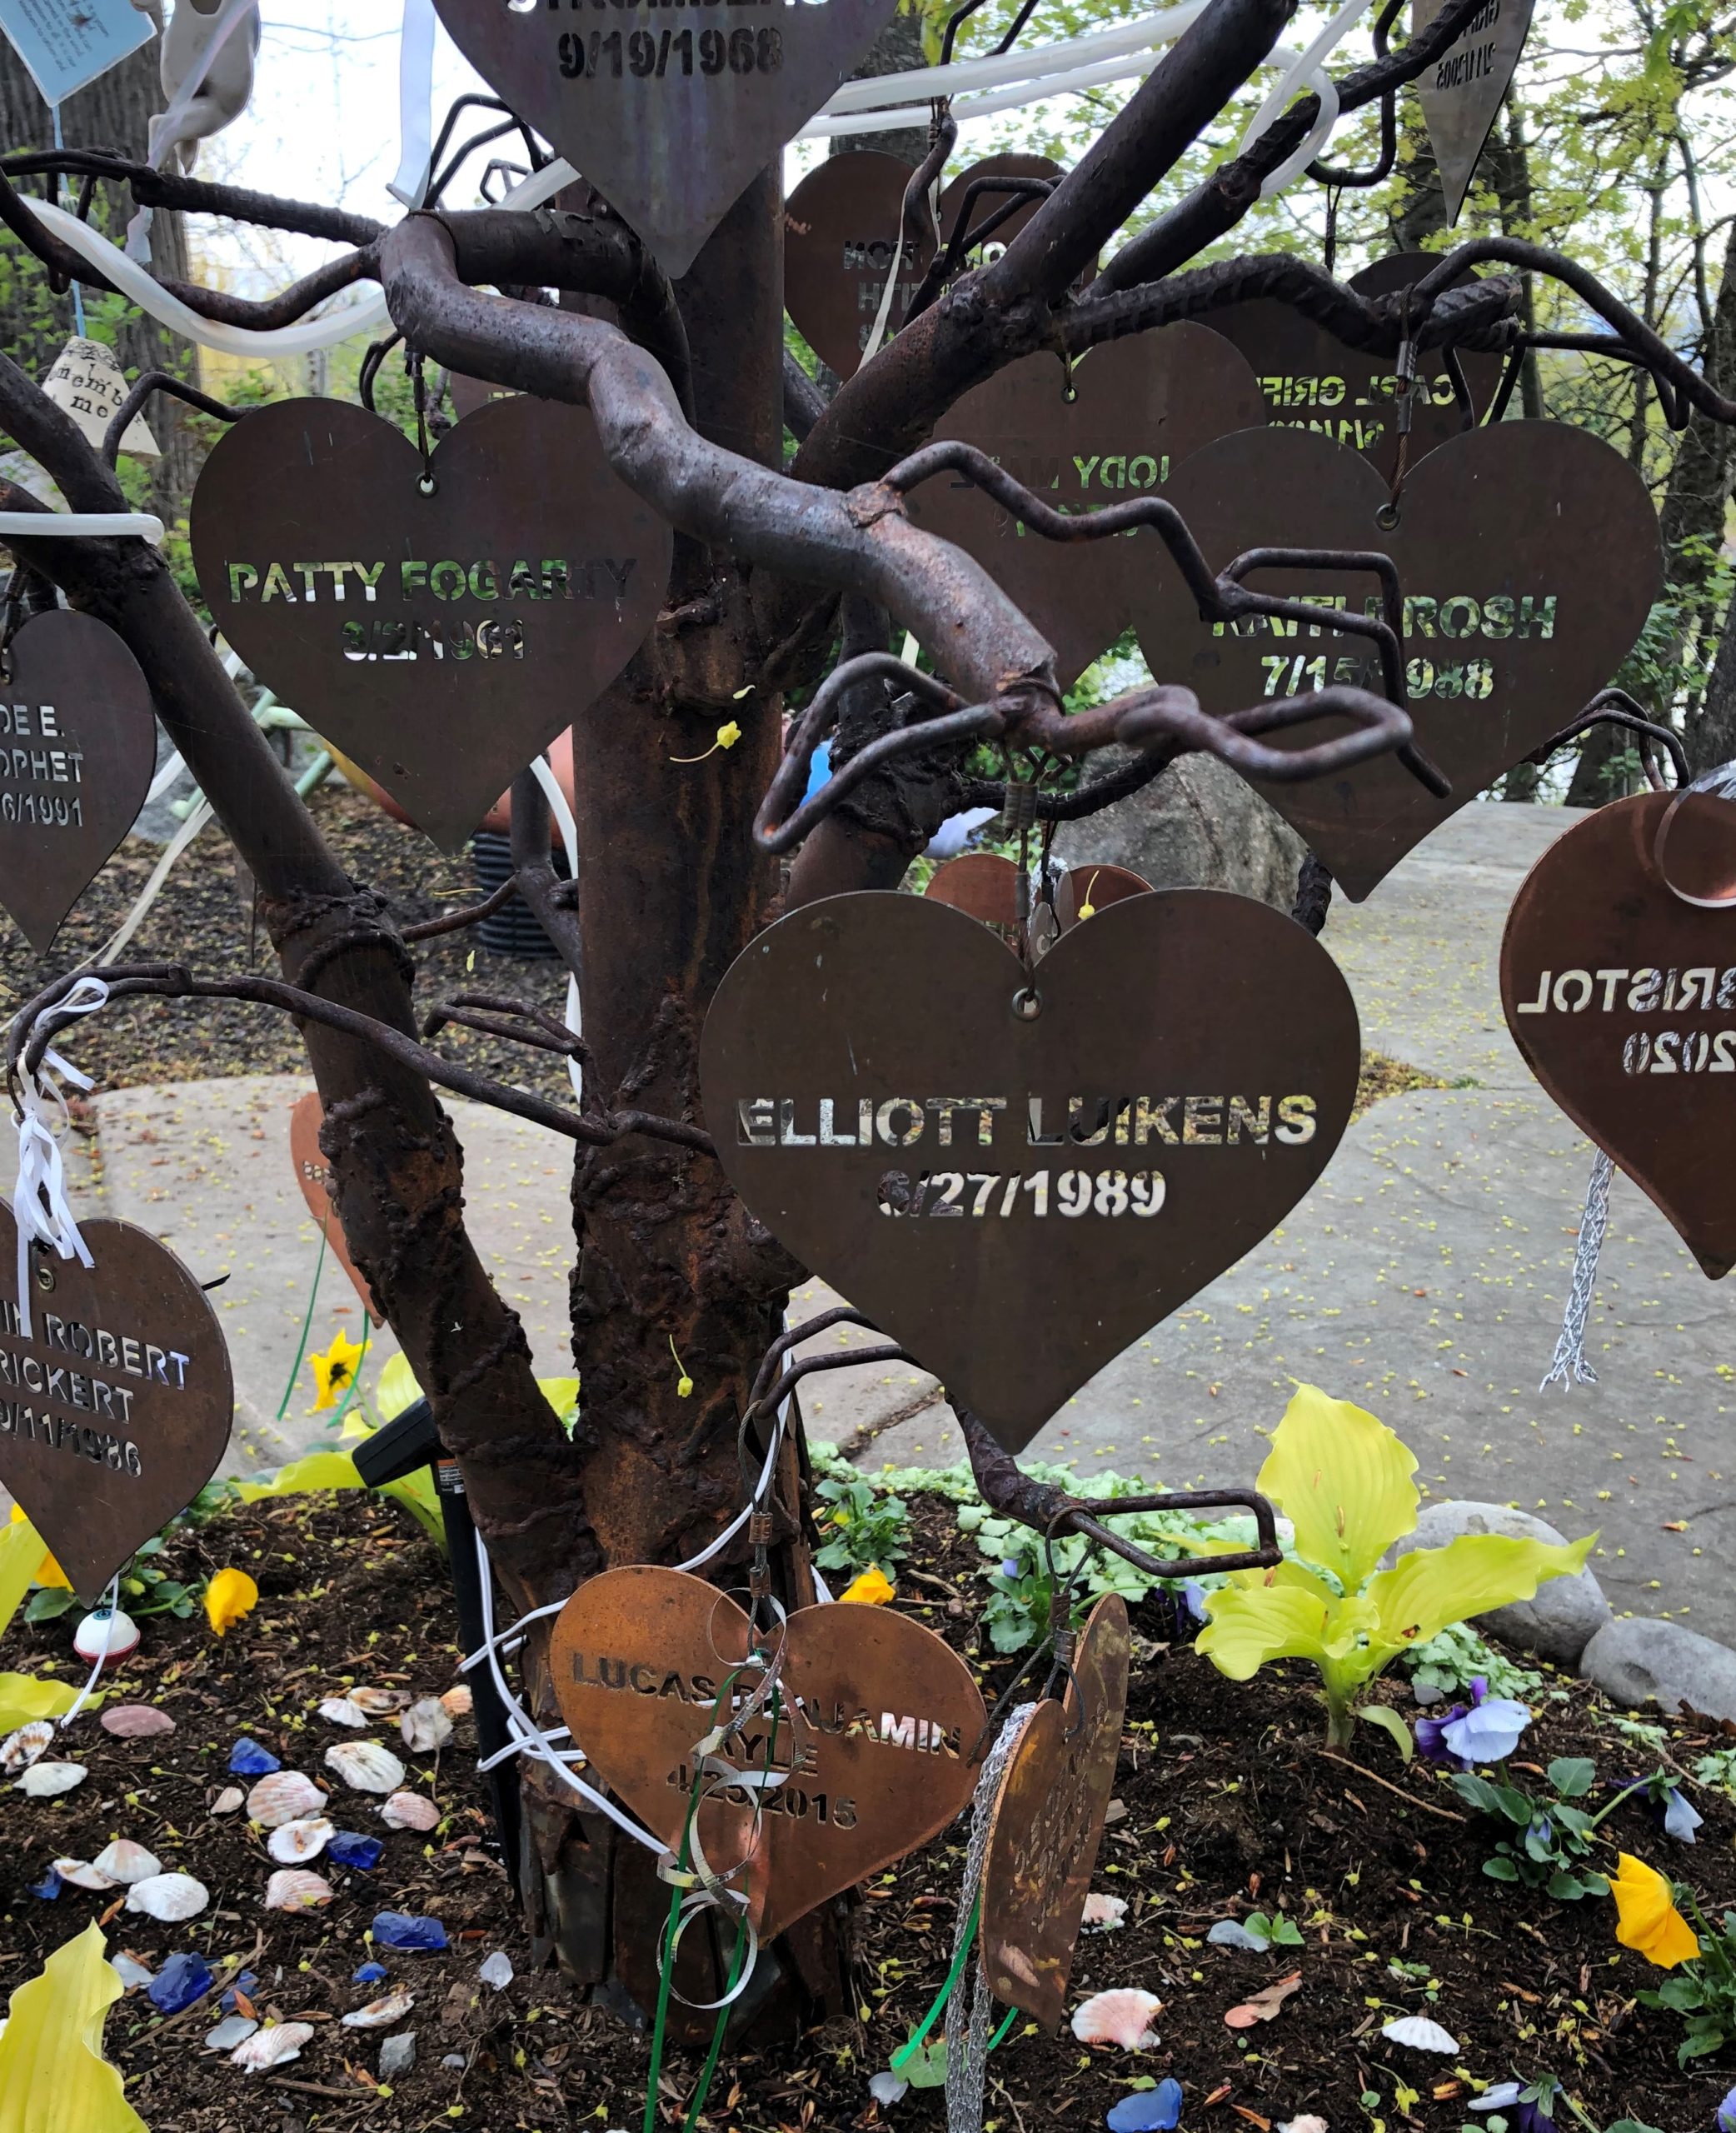 tree with heart pendants with people's names, highlight for Elliott Luikens 3/27/1989